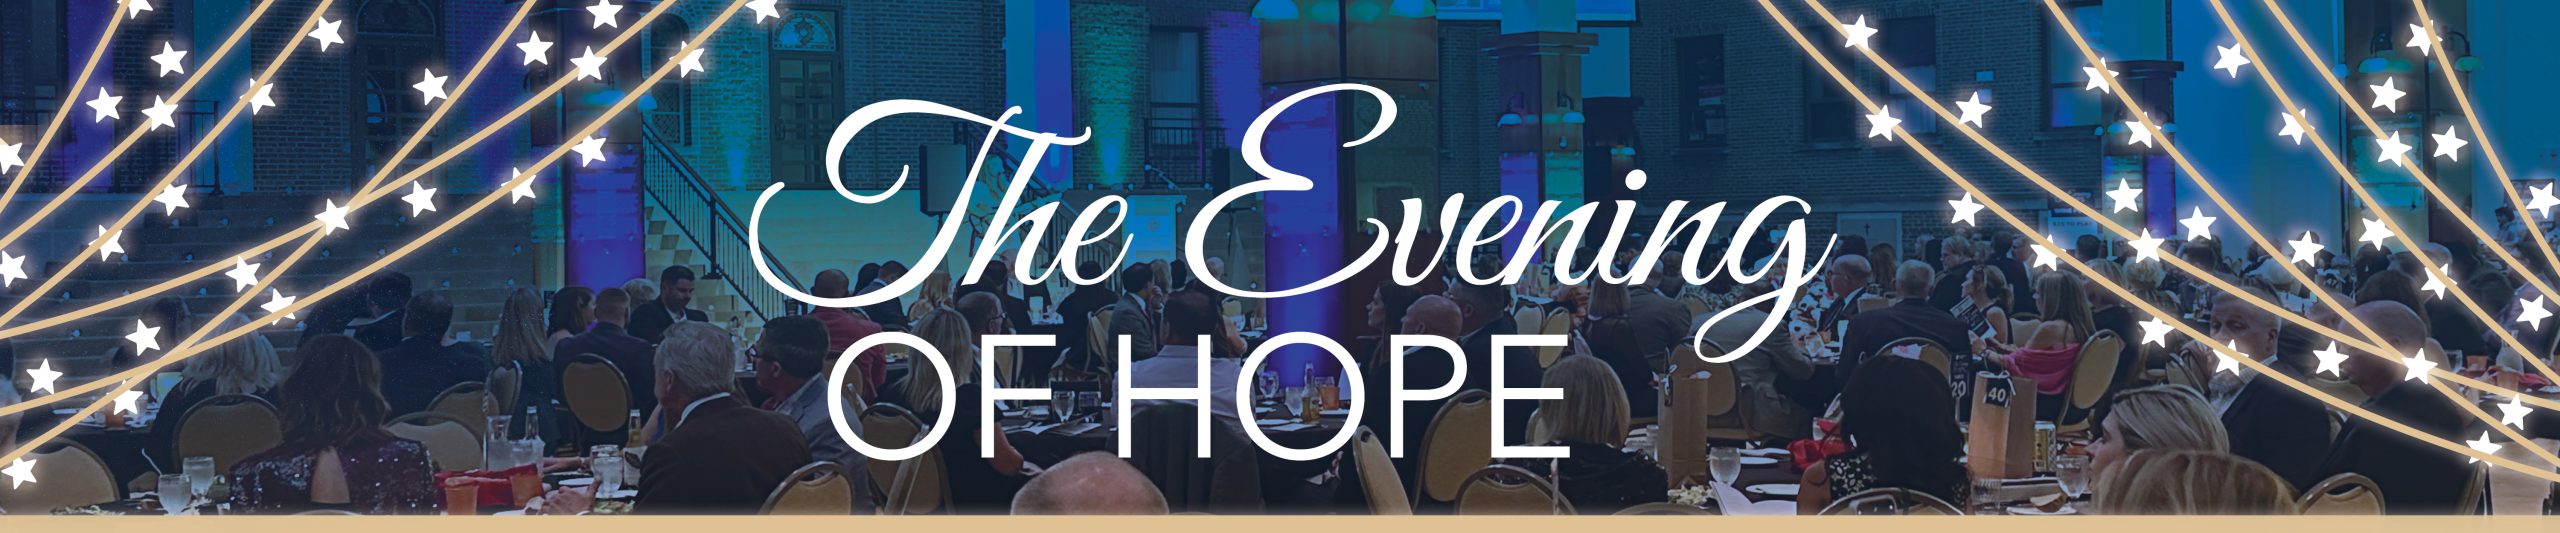 COL-Evening-of-Hope-Banner-1